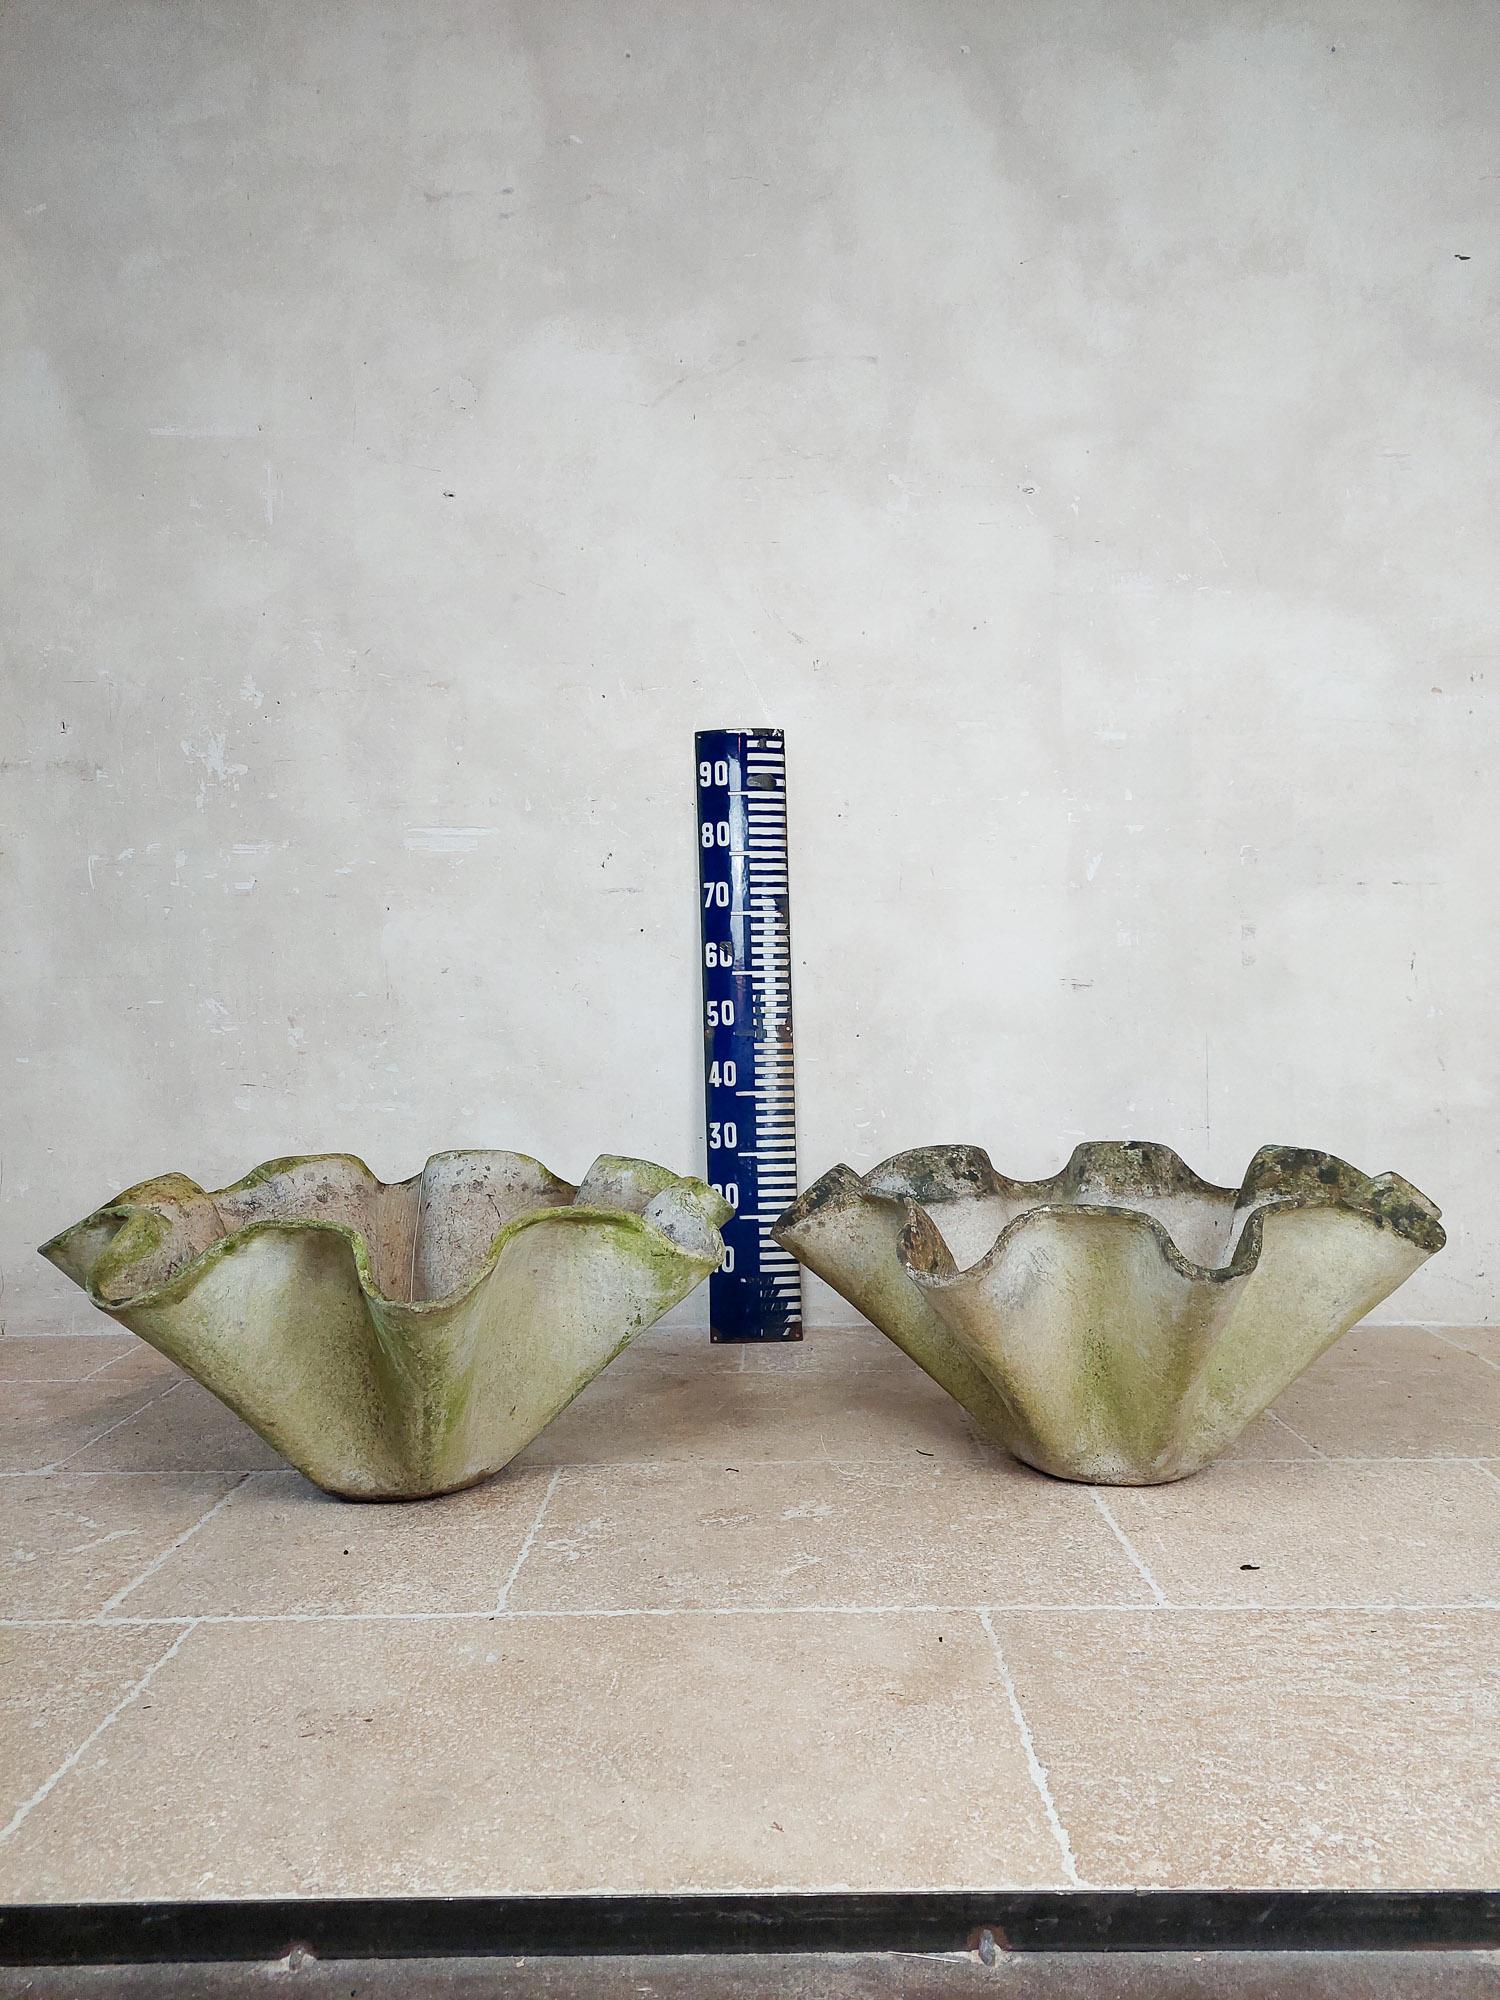 Beautifully shaped large pair of biomorphic pots by Swiss architect Willy Guhl. Manufactured by Eternit AG, who produced all of Guhl's designs. These pots look similar to the handkerchief planters by Willy Guhl, but a have little more the looks of